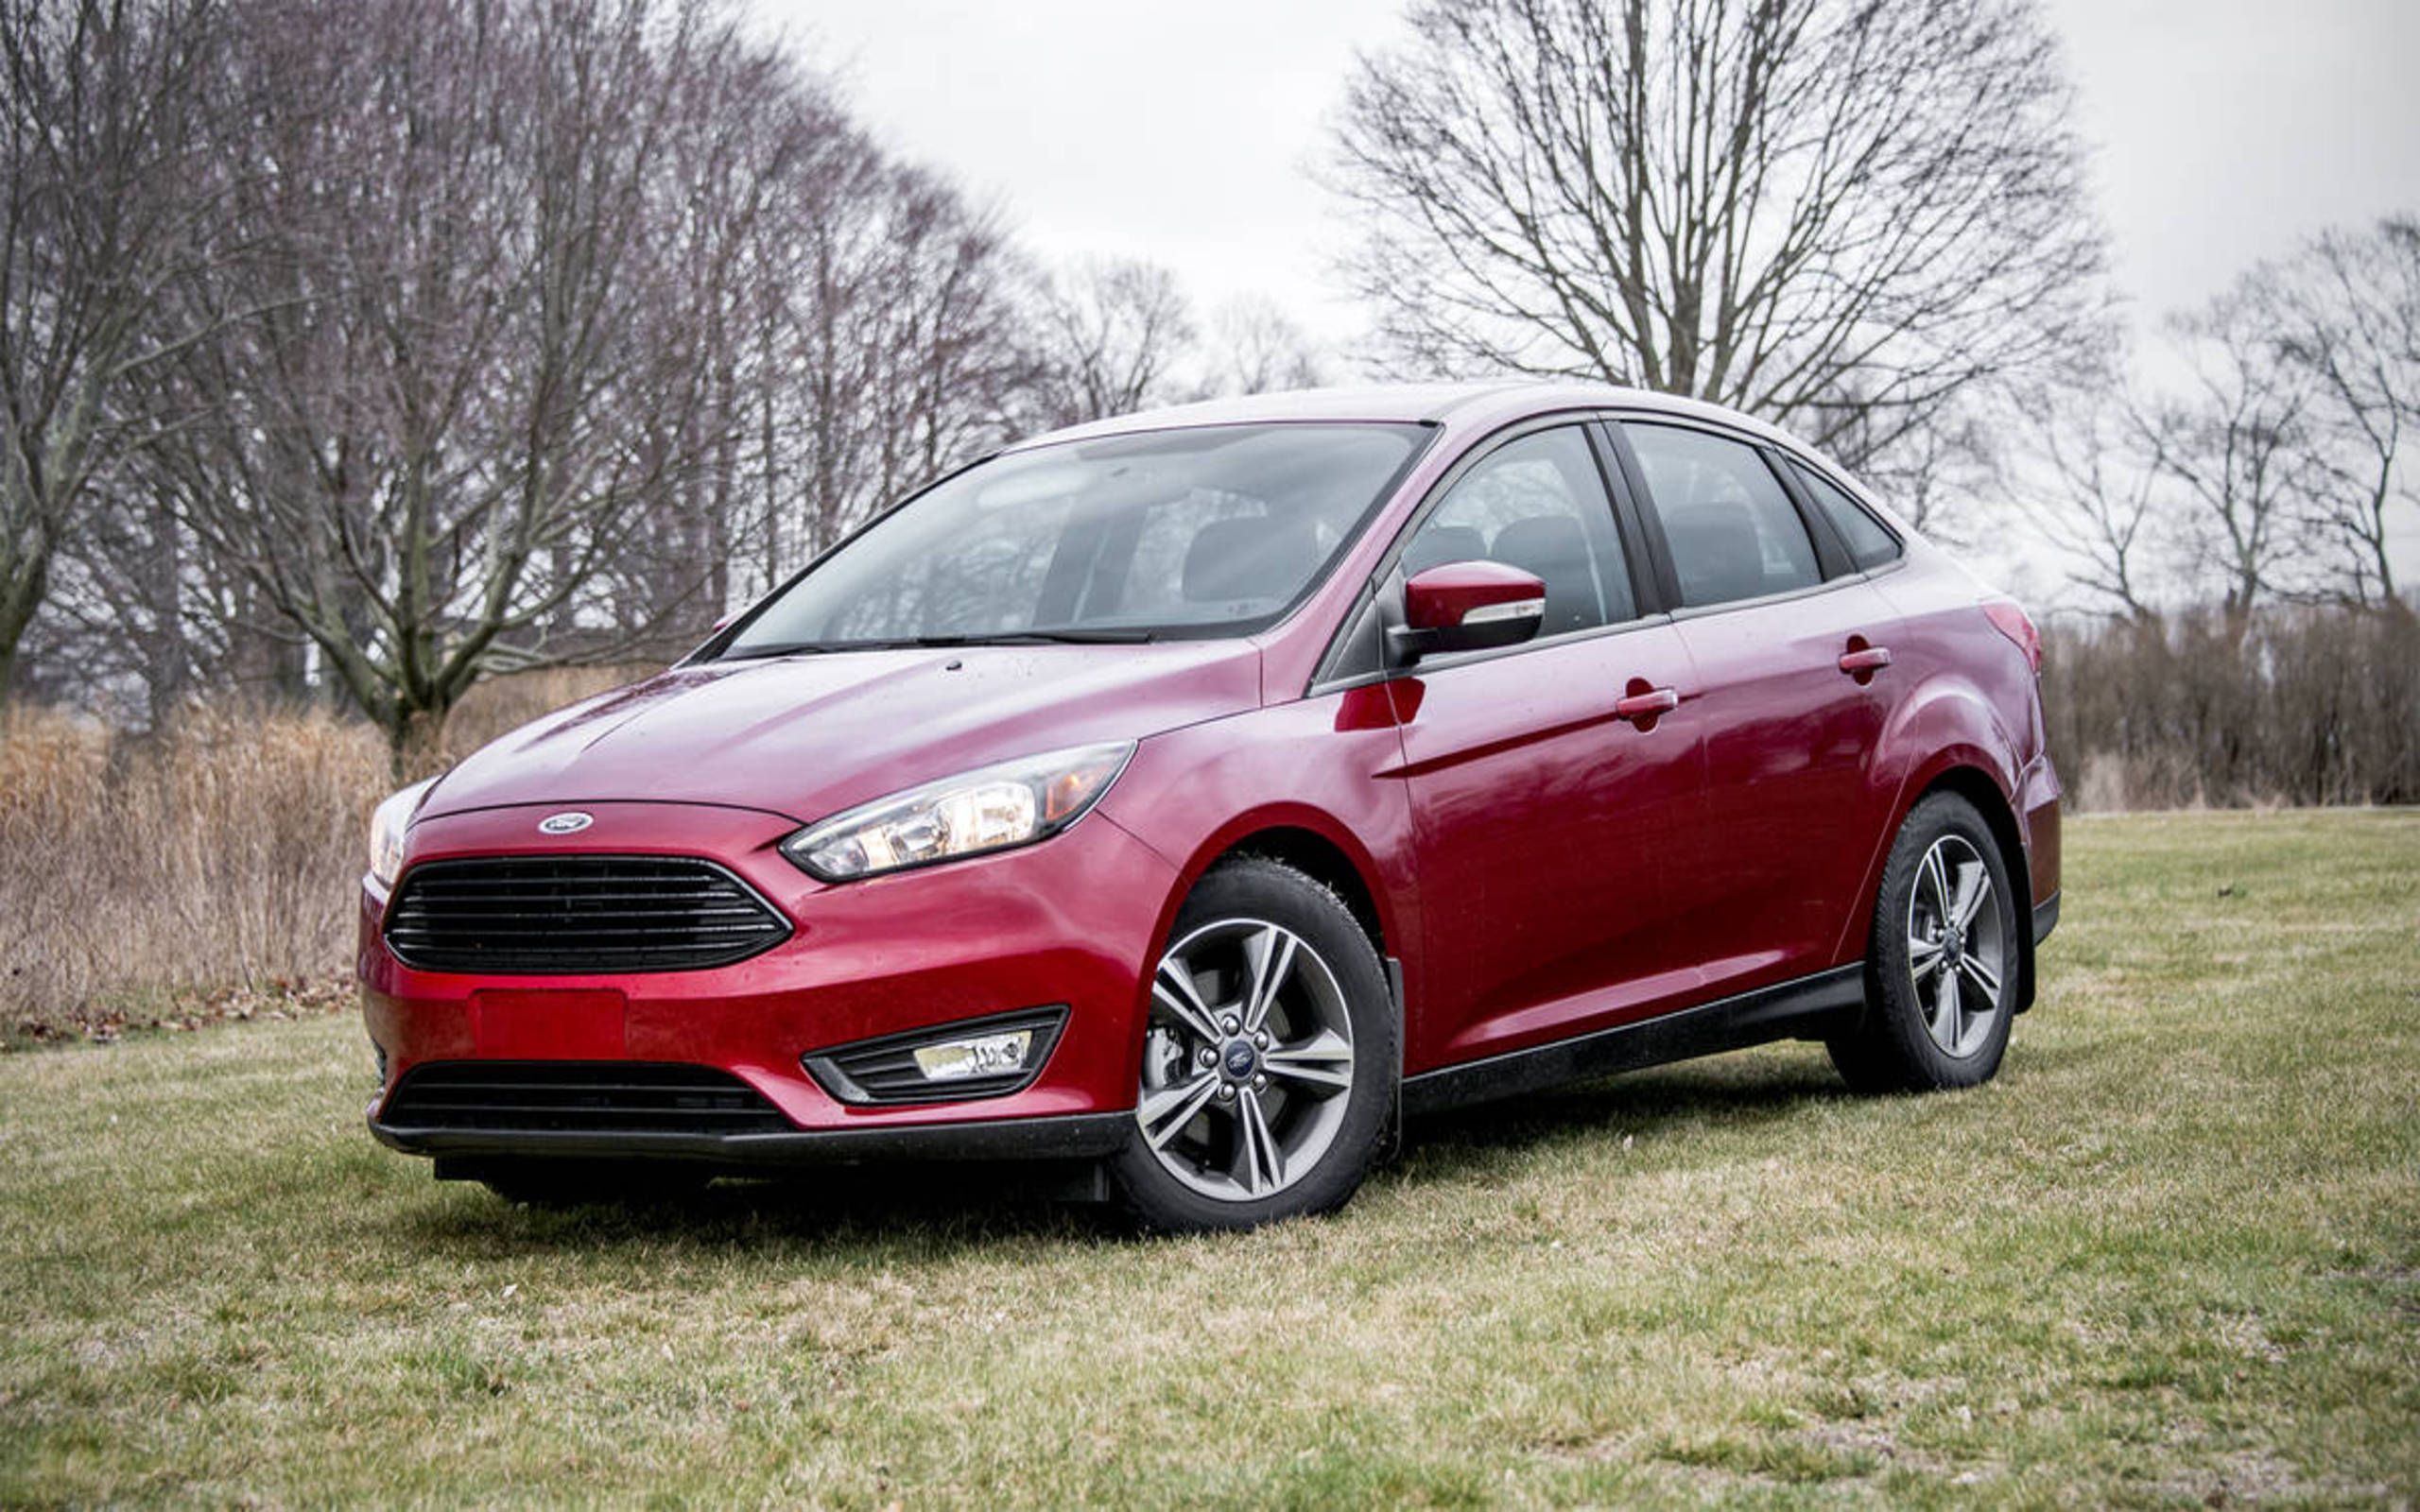 New Ford Focus revealed, coming to US in 2019 via China and Europe